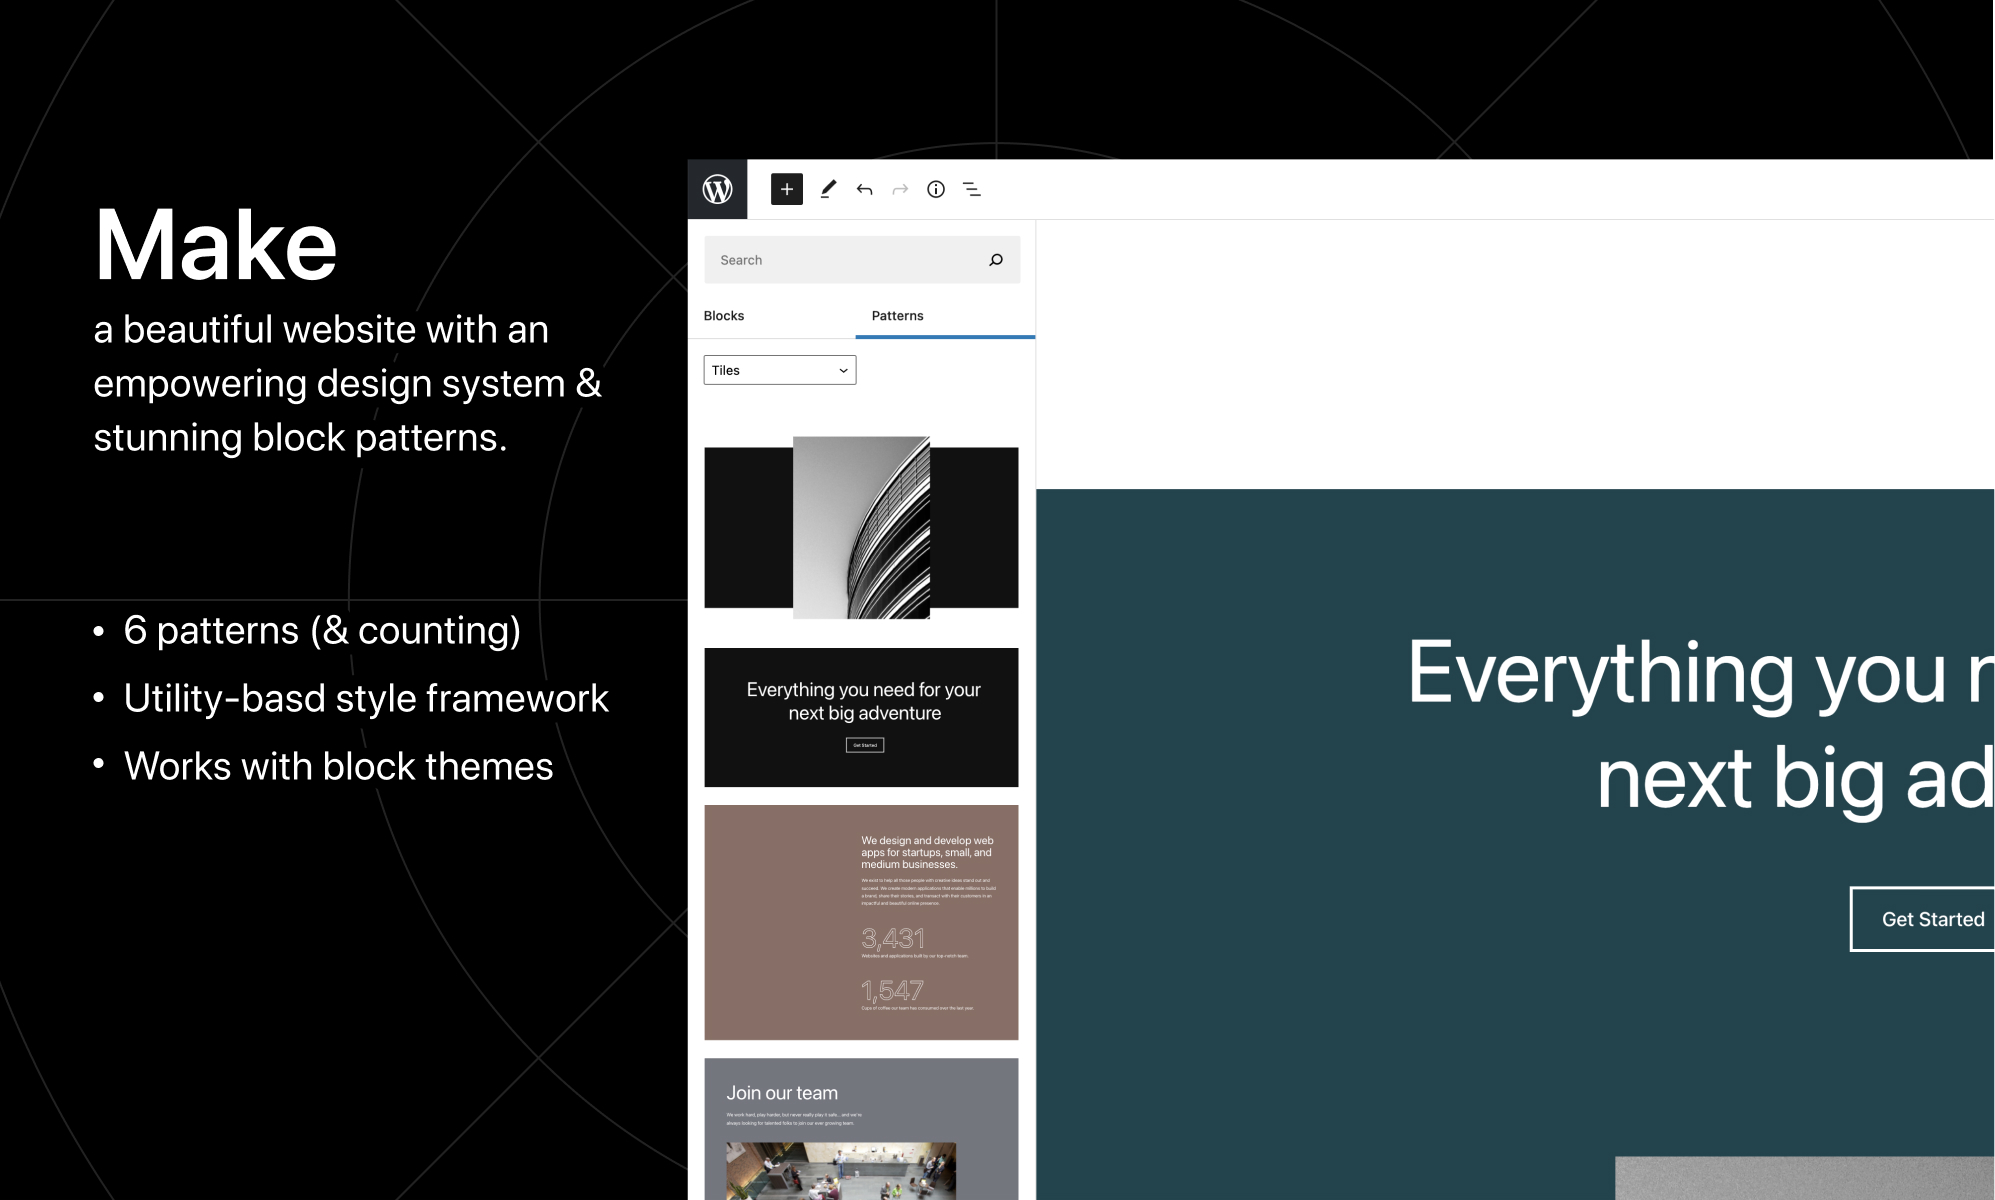 Make a beautiful website with an empowering design system & stunning block patterns in Tiles.